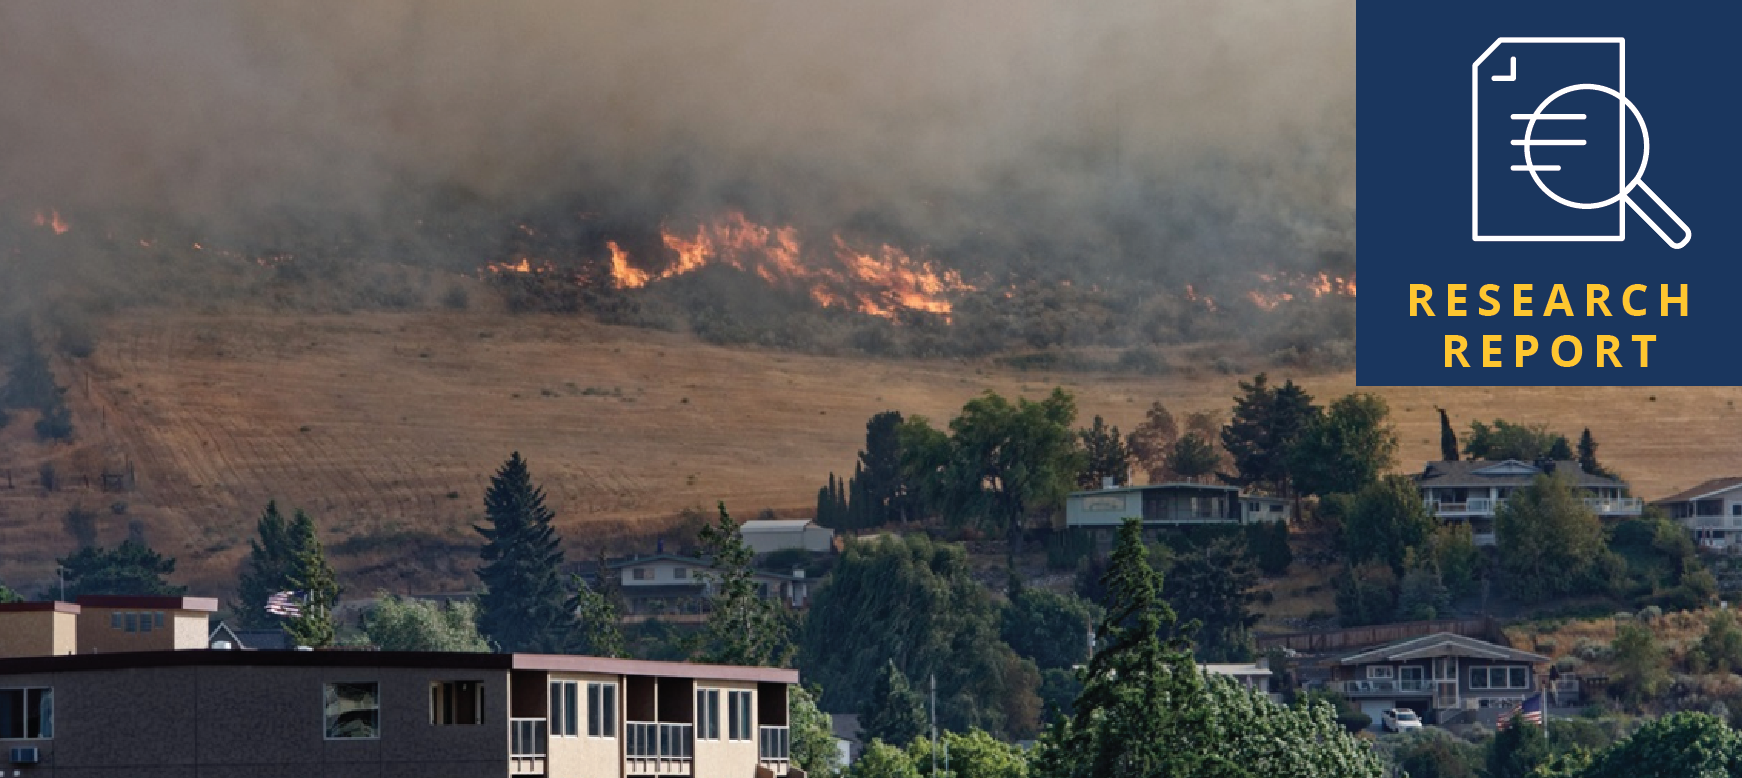 Wildfire coming towards a housing community